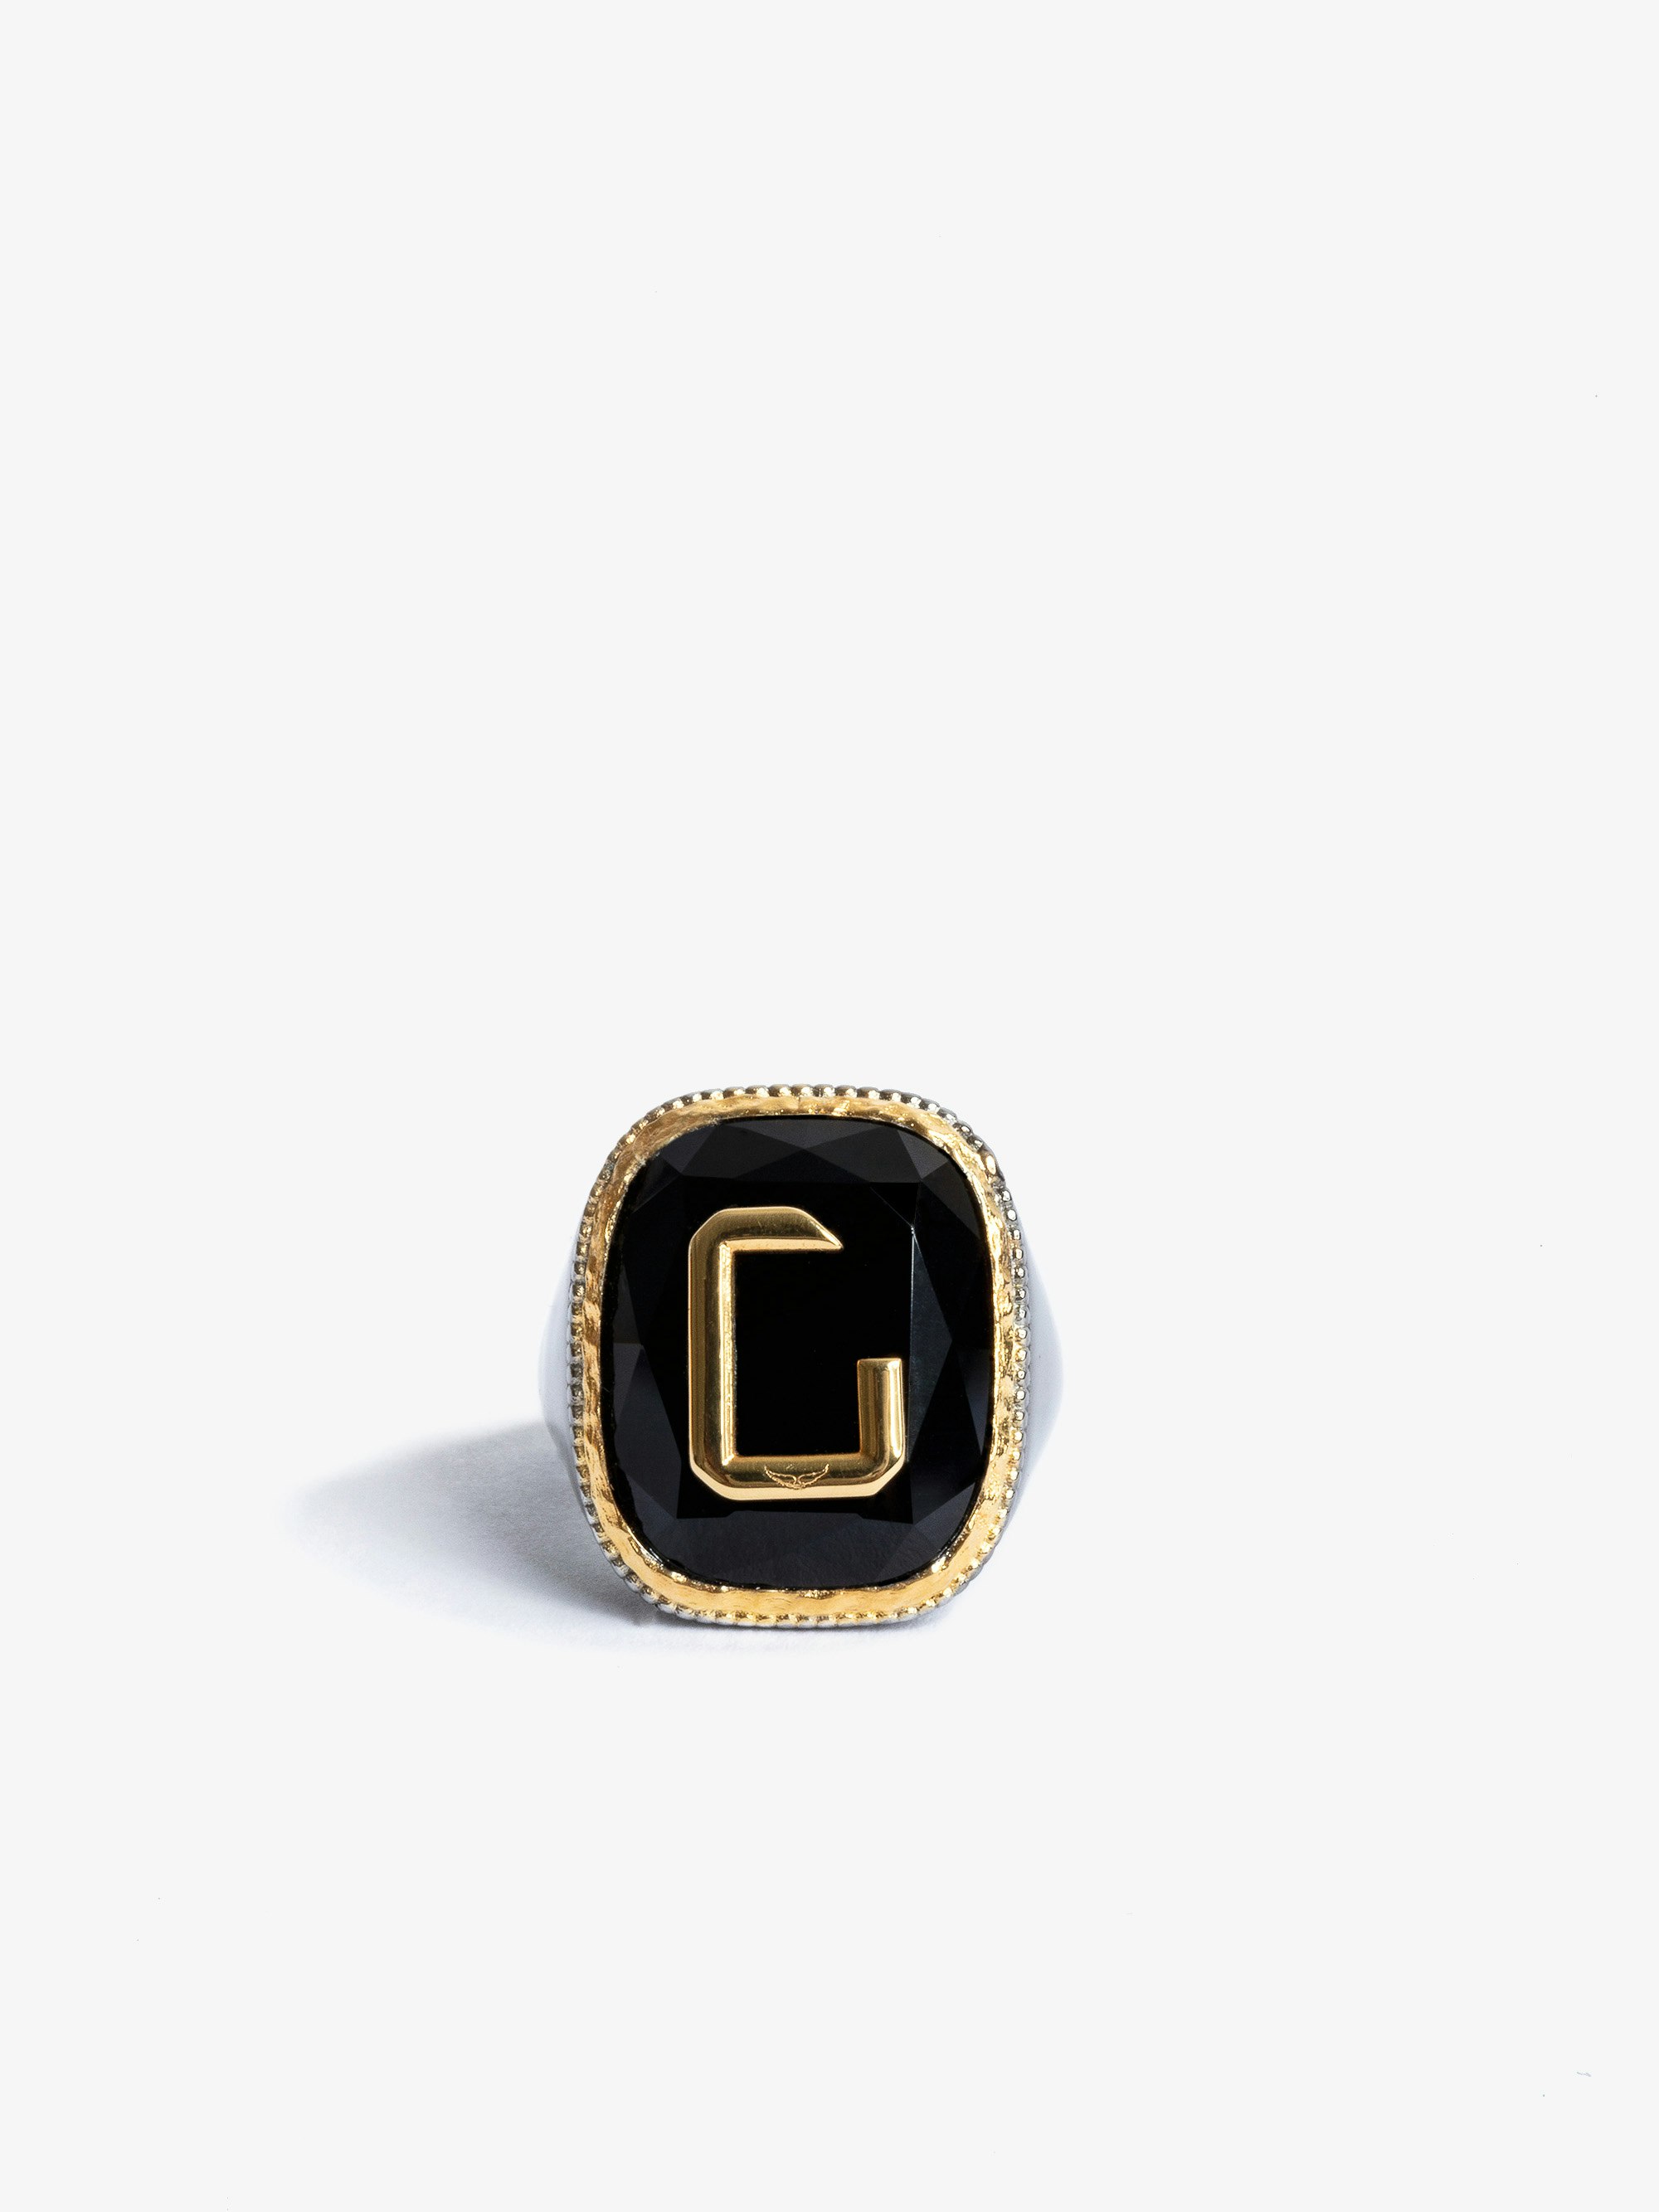 Cecilia Signet Ring - Blackened and gold-tone metal signet ring.